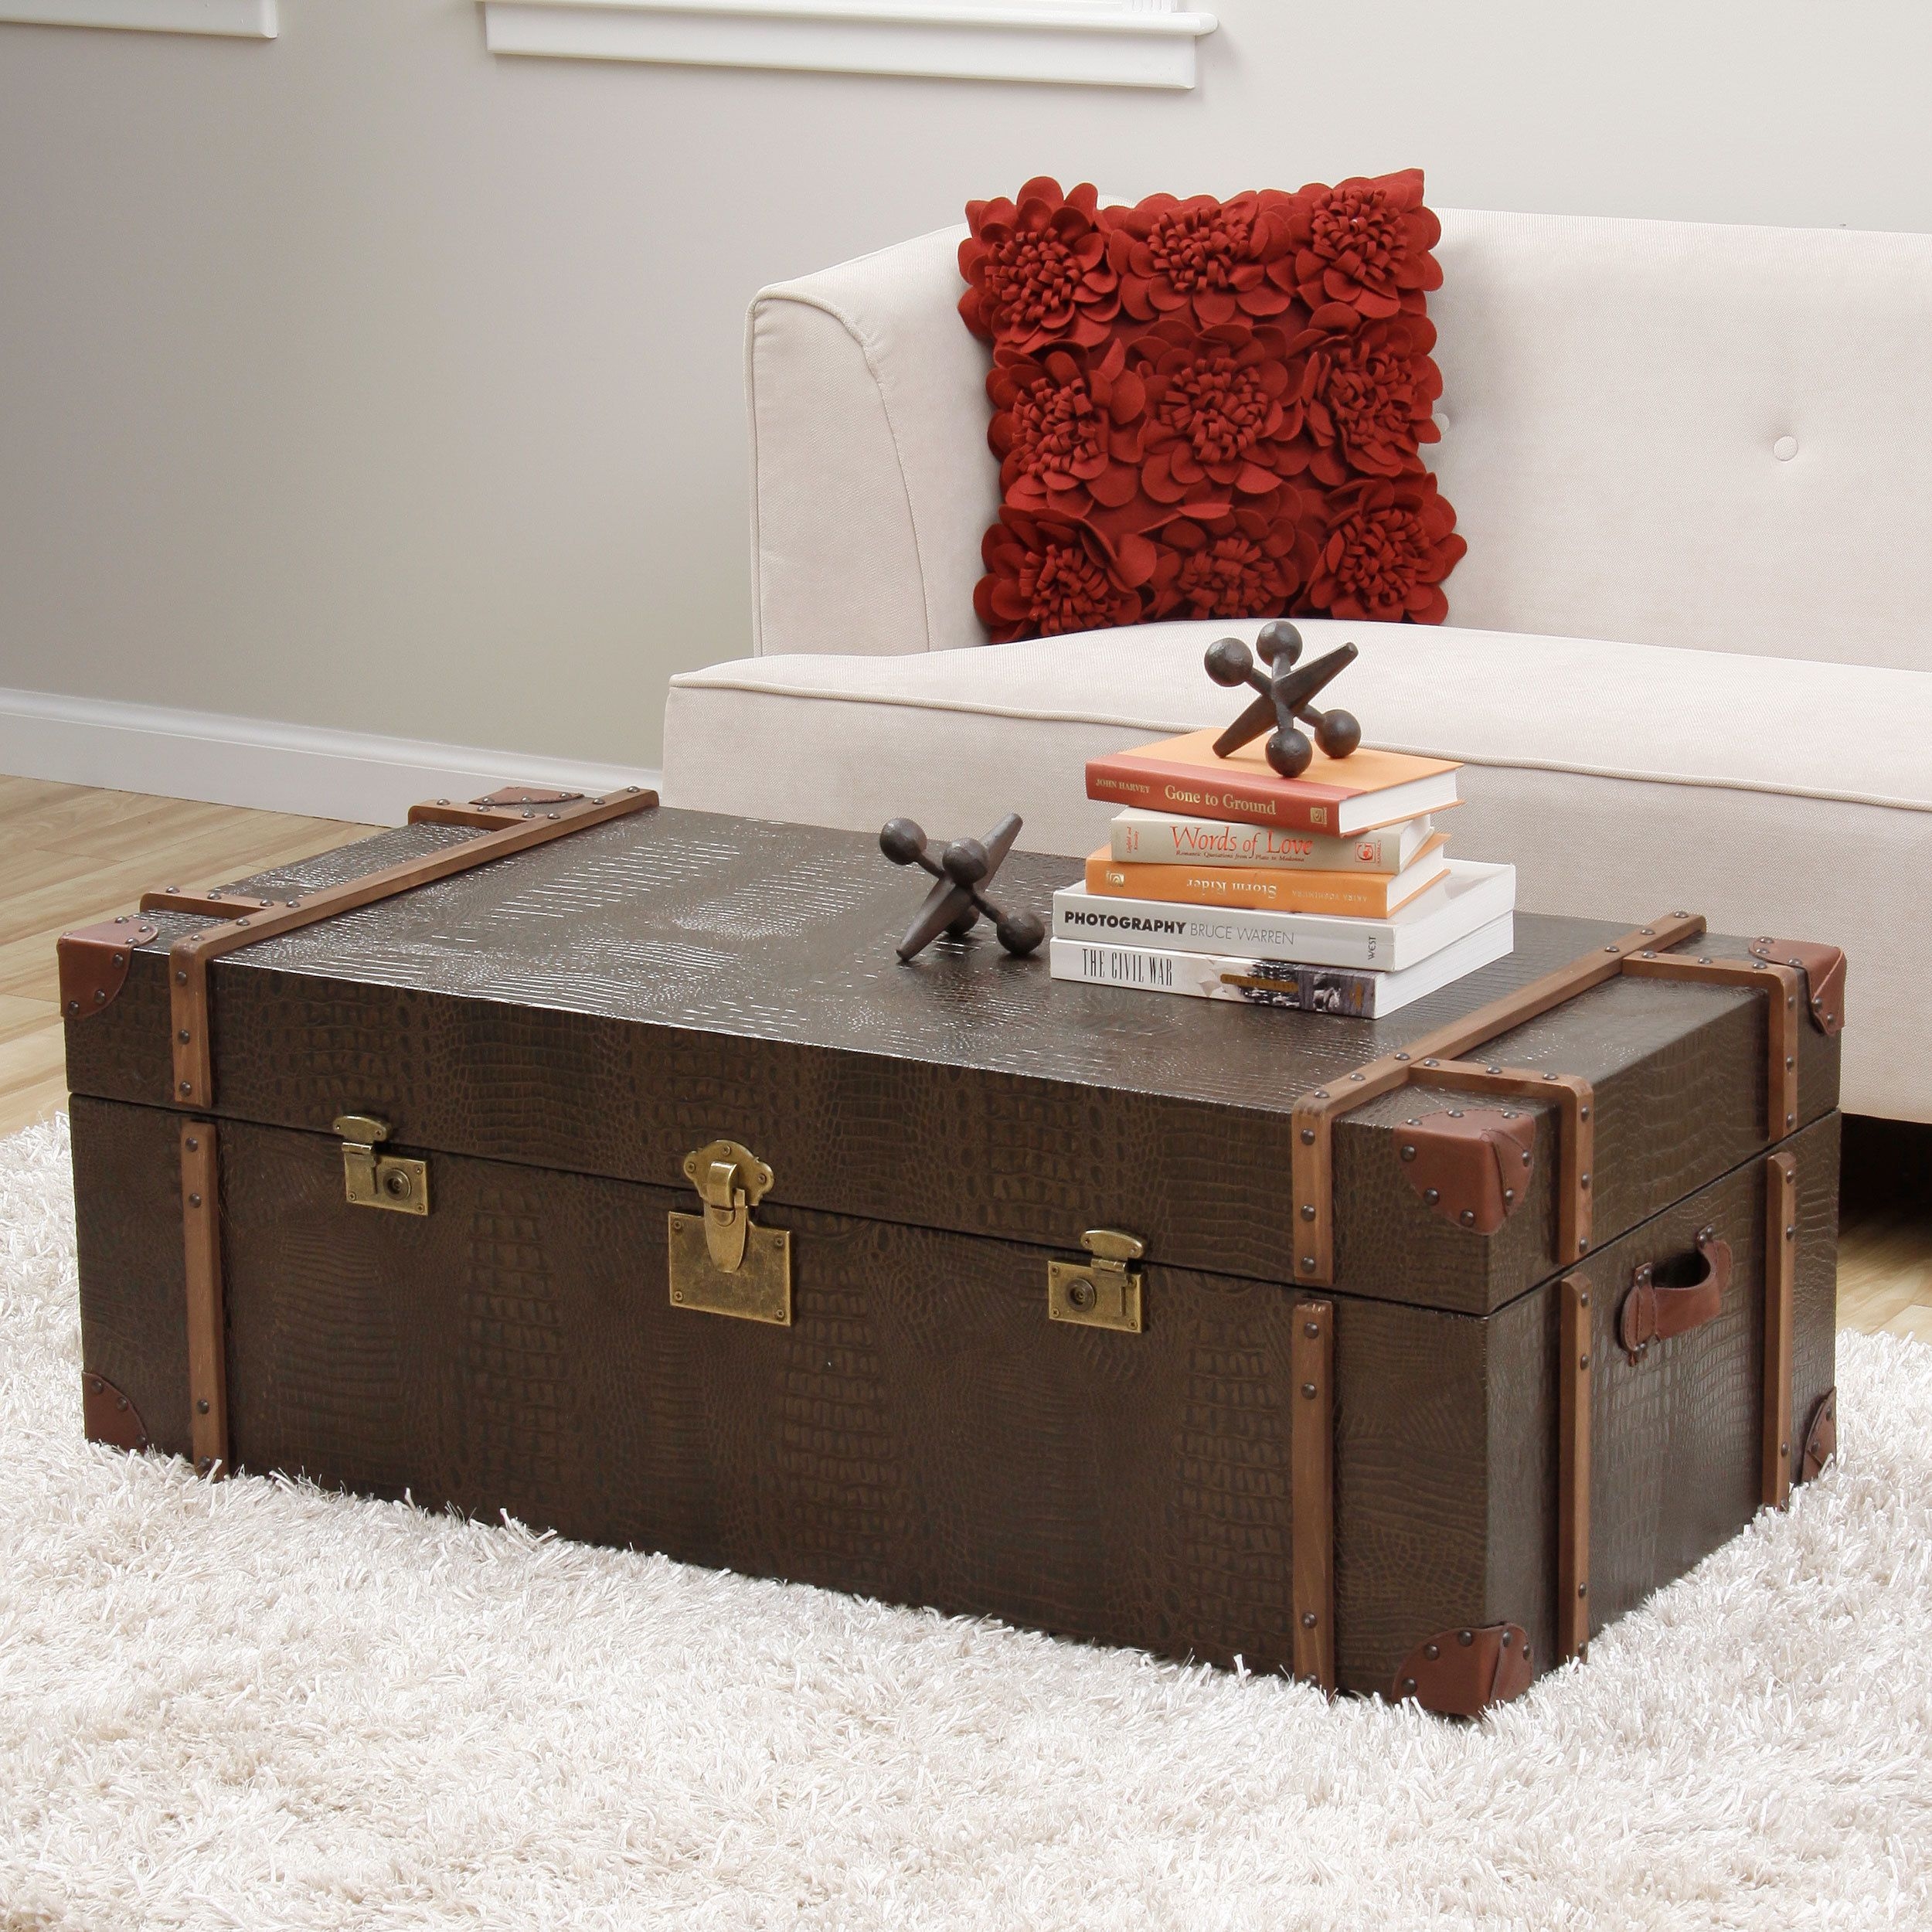 Journey black croc embossed leather trunk coffee table